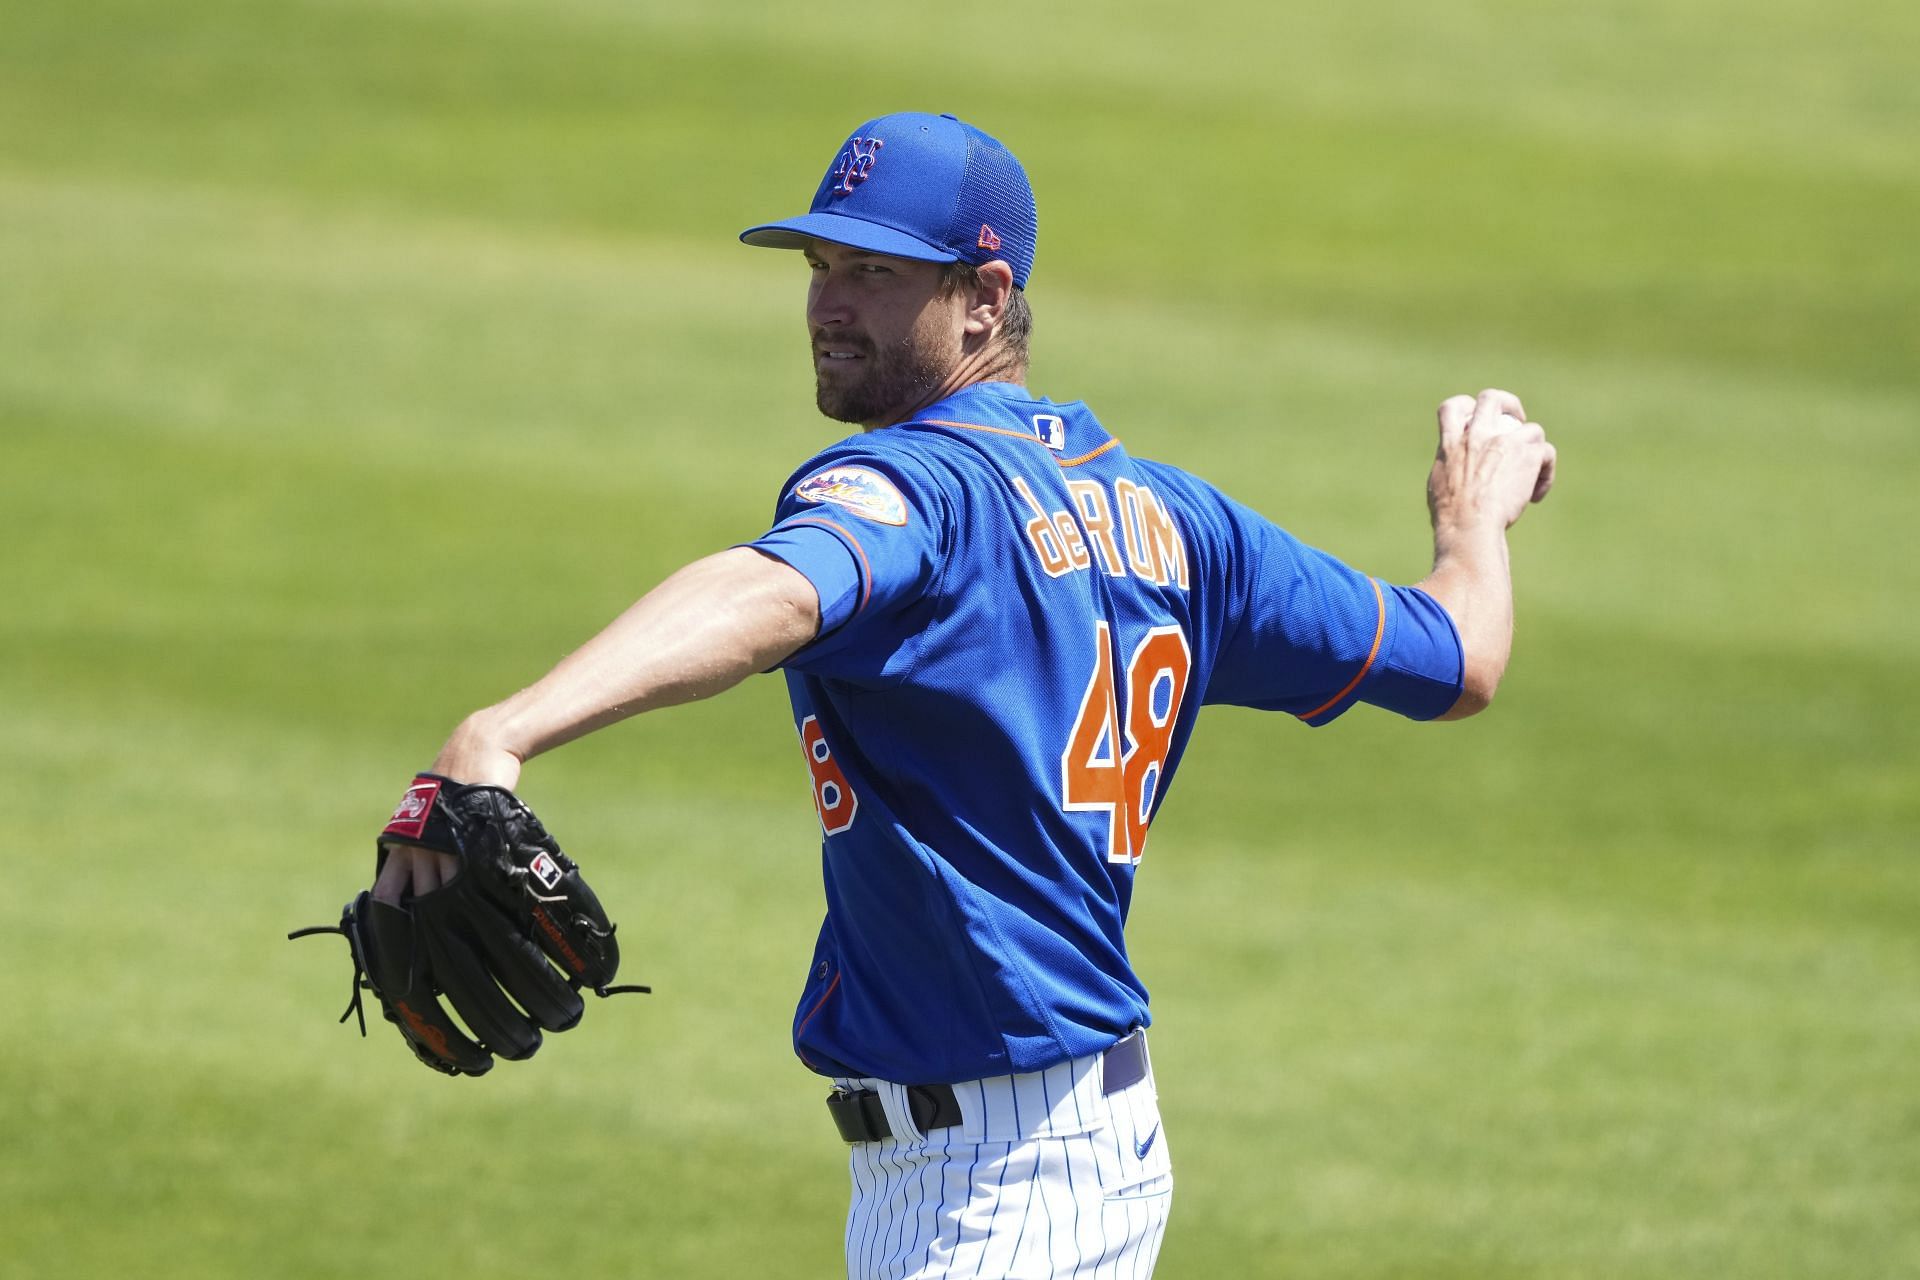 NY Mets SP Jacob deGrom is yet to make his first start of the 2022 regular season